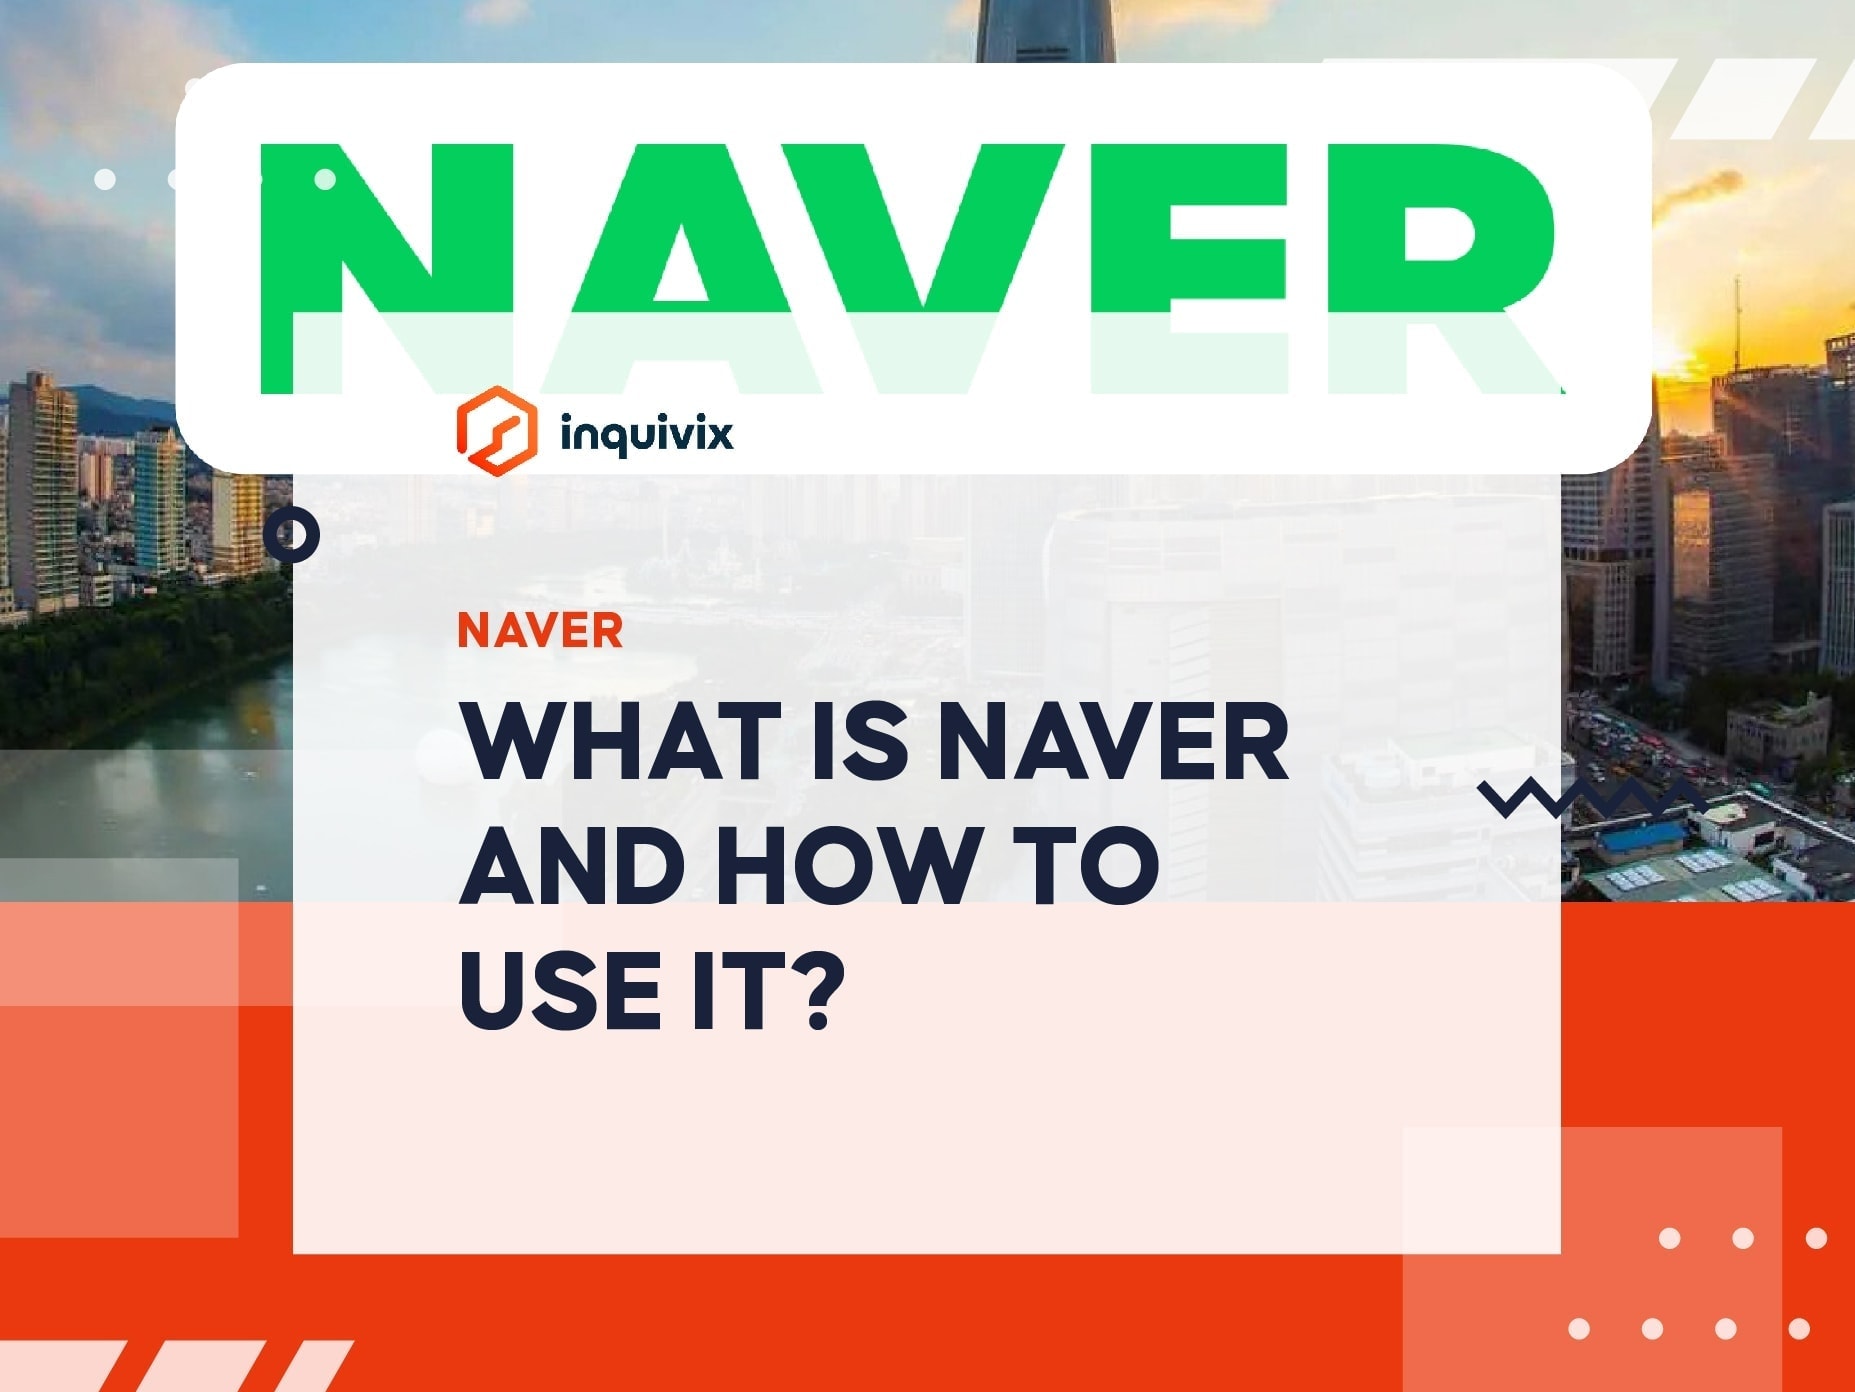 NAVER - WHAT IS NAVER AND HOW TO USE IT